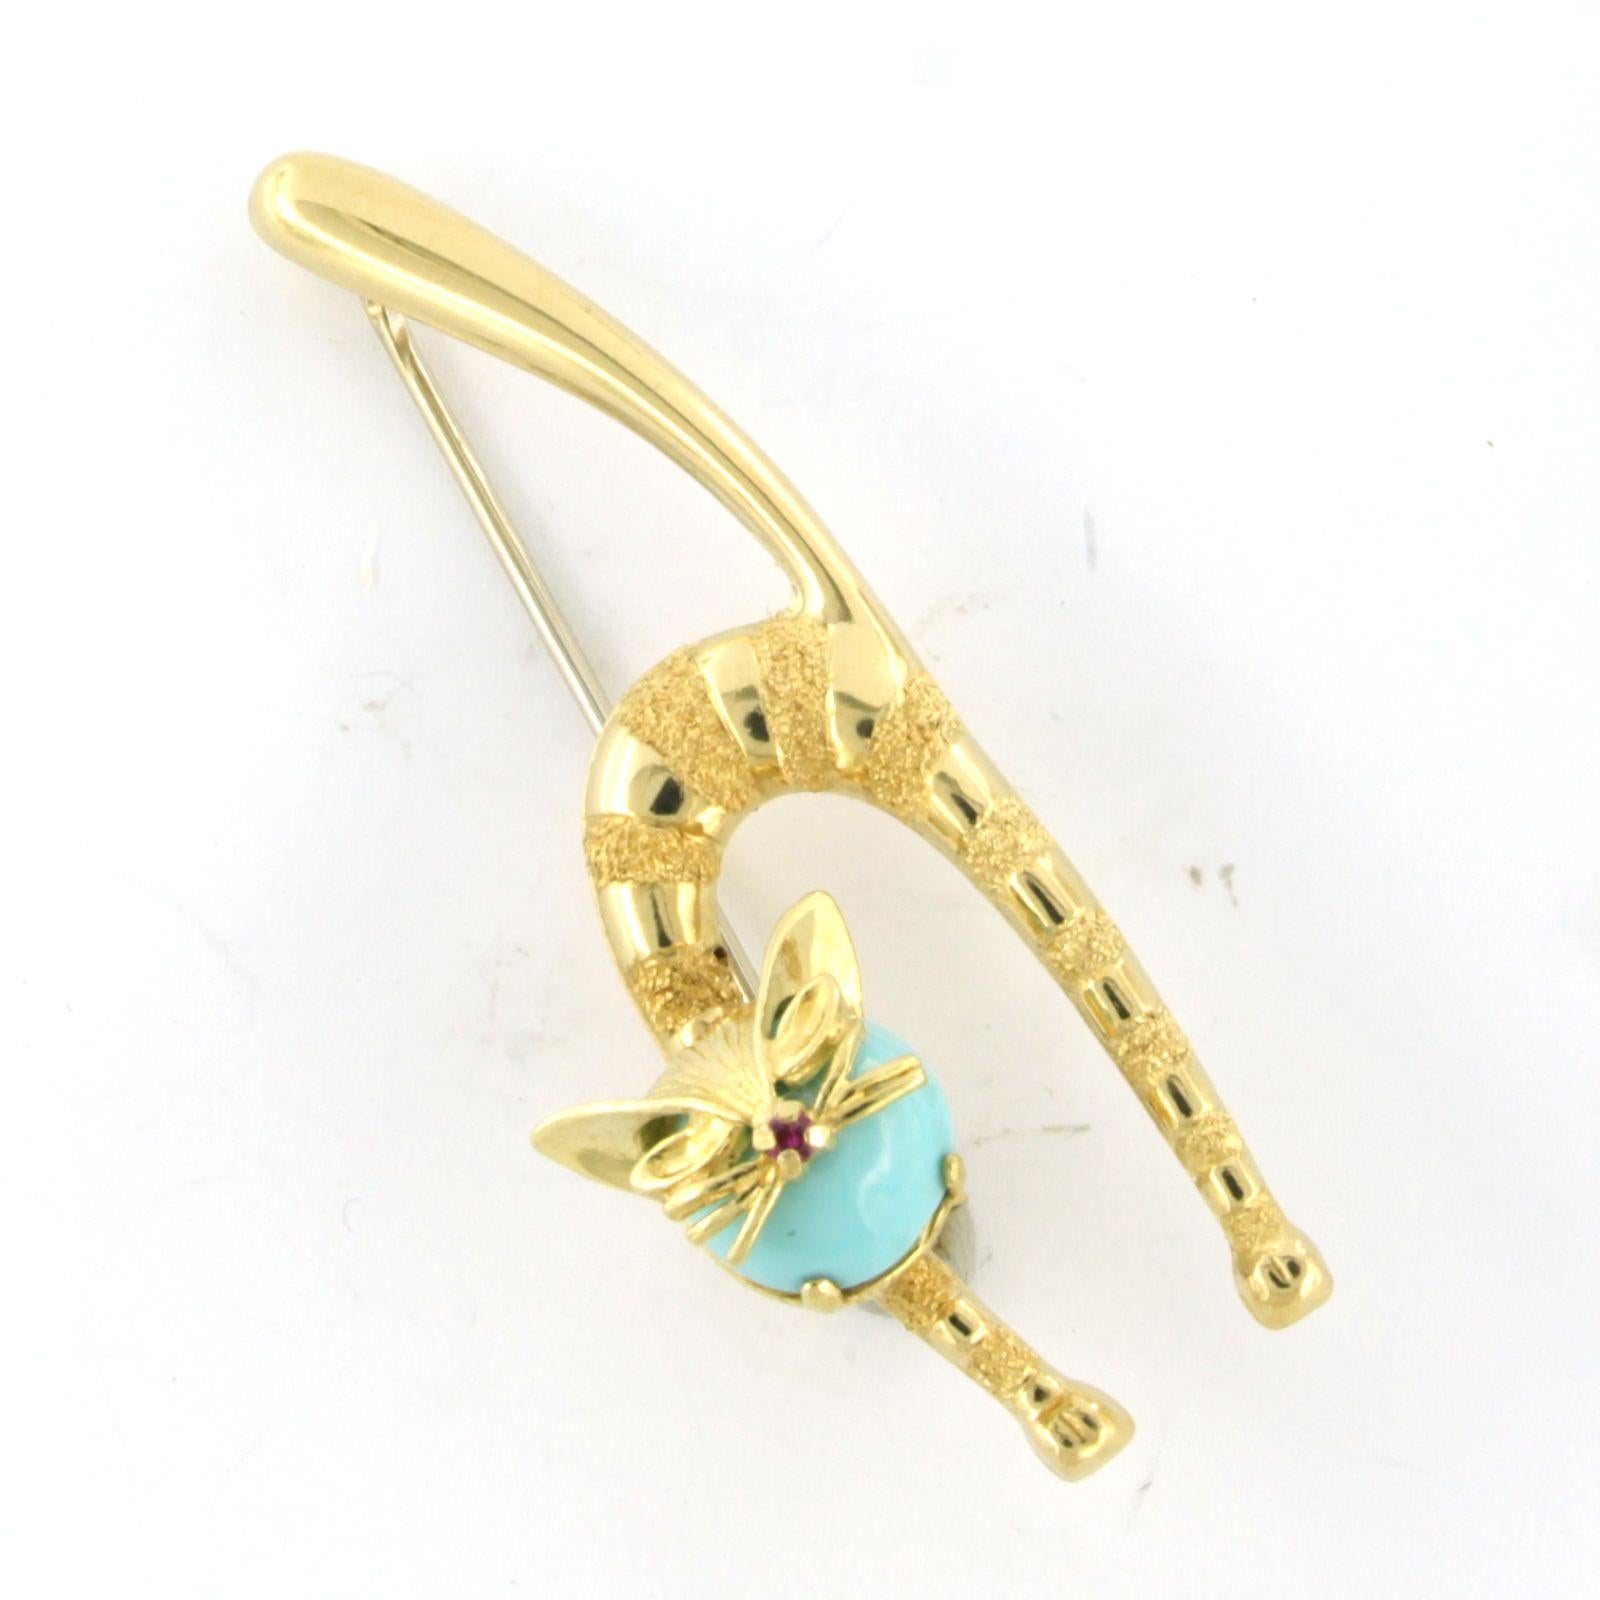 18 kt yellow gold brooch in the shape of a cat with ruby ​​and turquoise - dim. 5.1 cm long by 1.8 cm wide

detailed description:

the size of the brooch is 5.1 cm long by 1.8 cm wide

weight 6.6 grams

put with

- 1 x 8.9 mm round cabachon cut